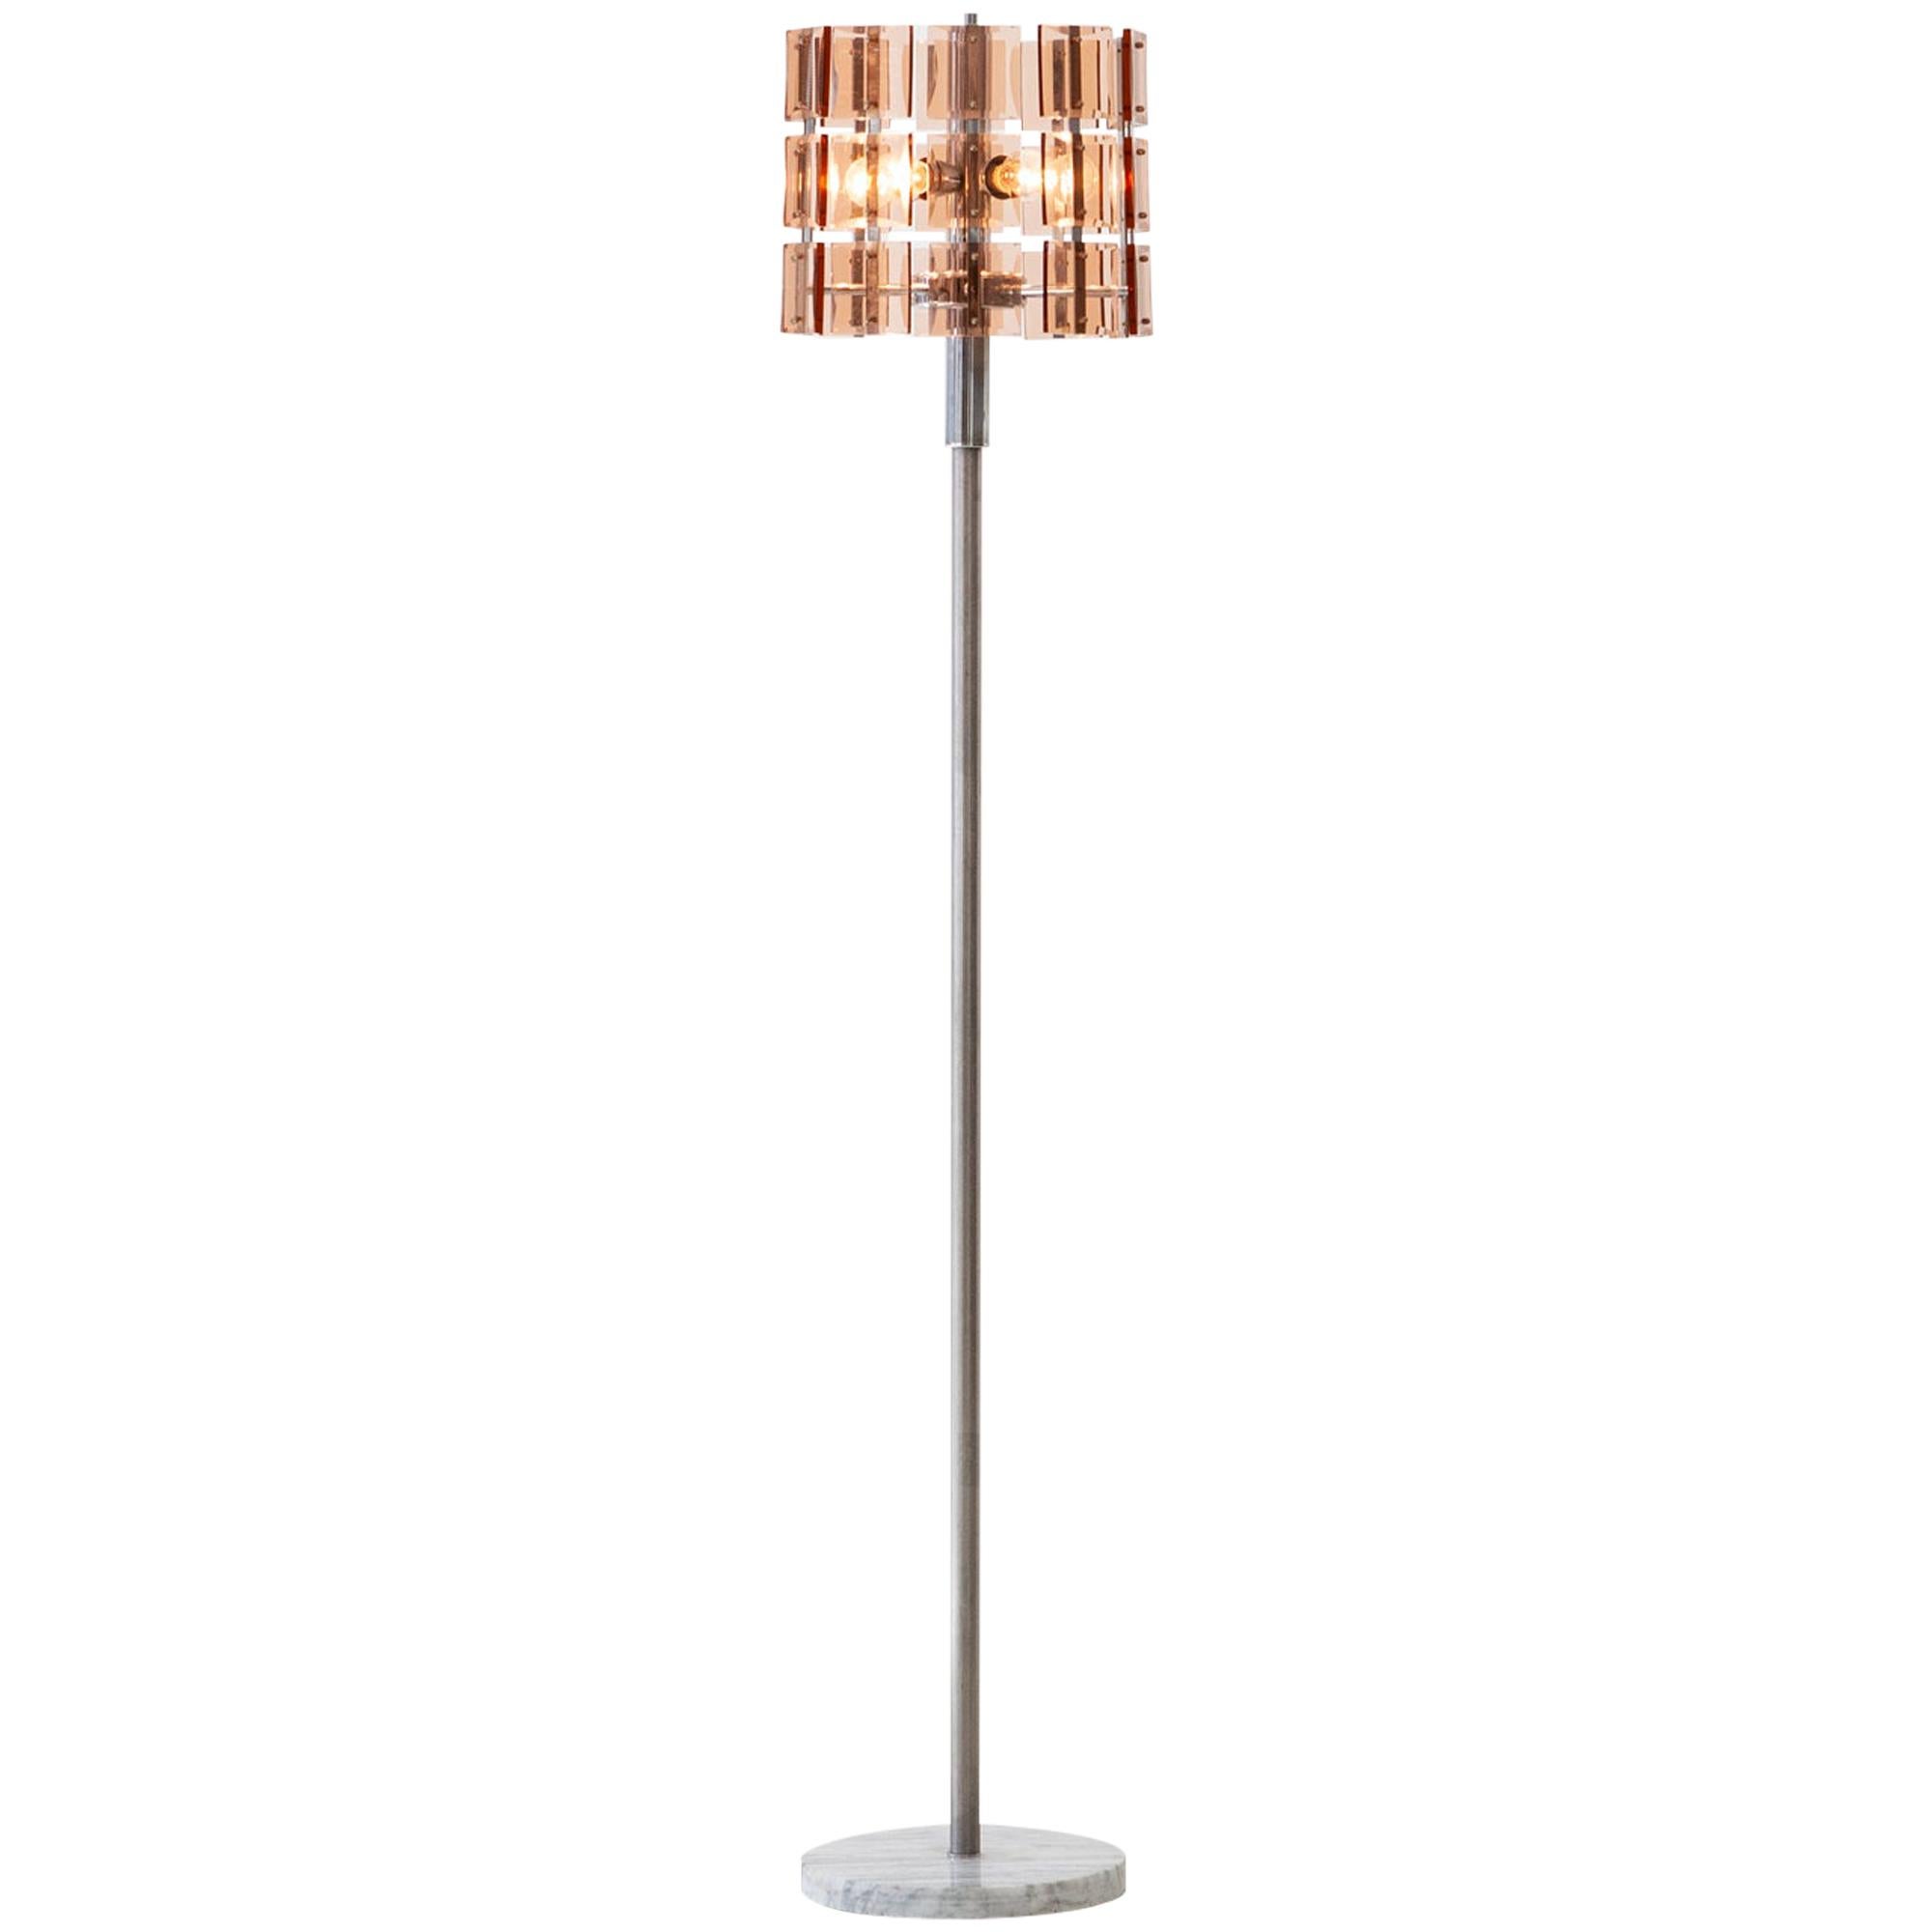 Italian Cognac Glass with Marble Floor Lamp, 1970s For Sale